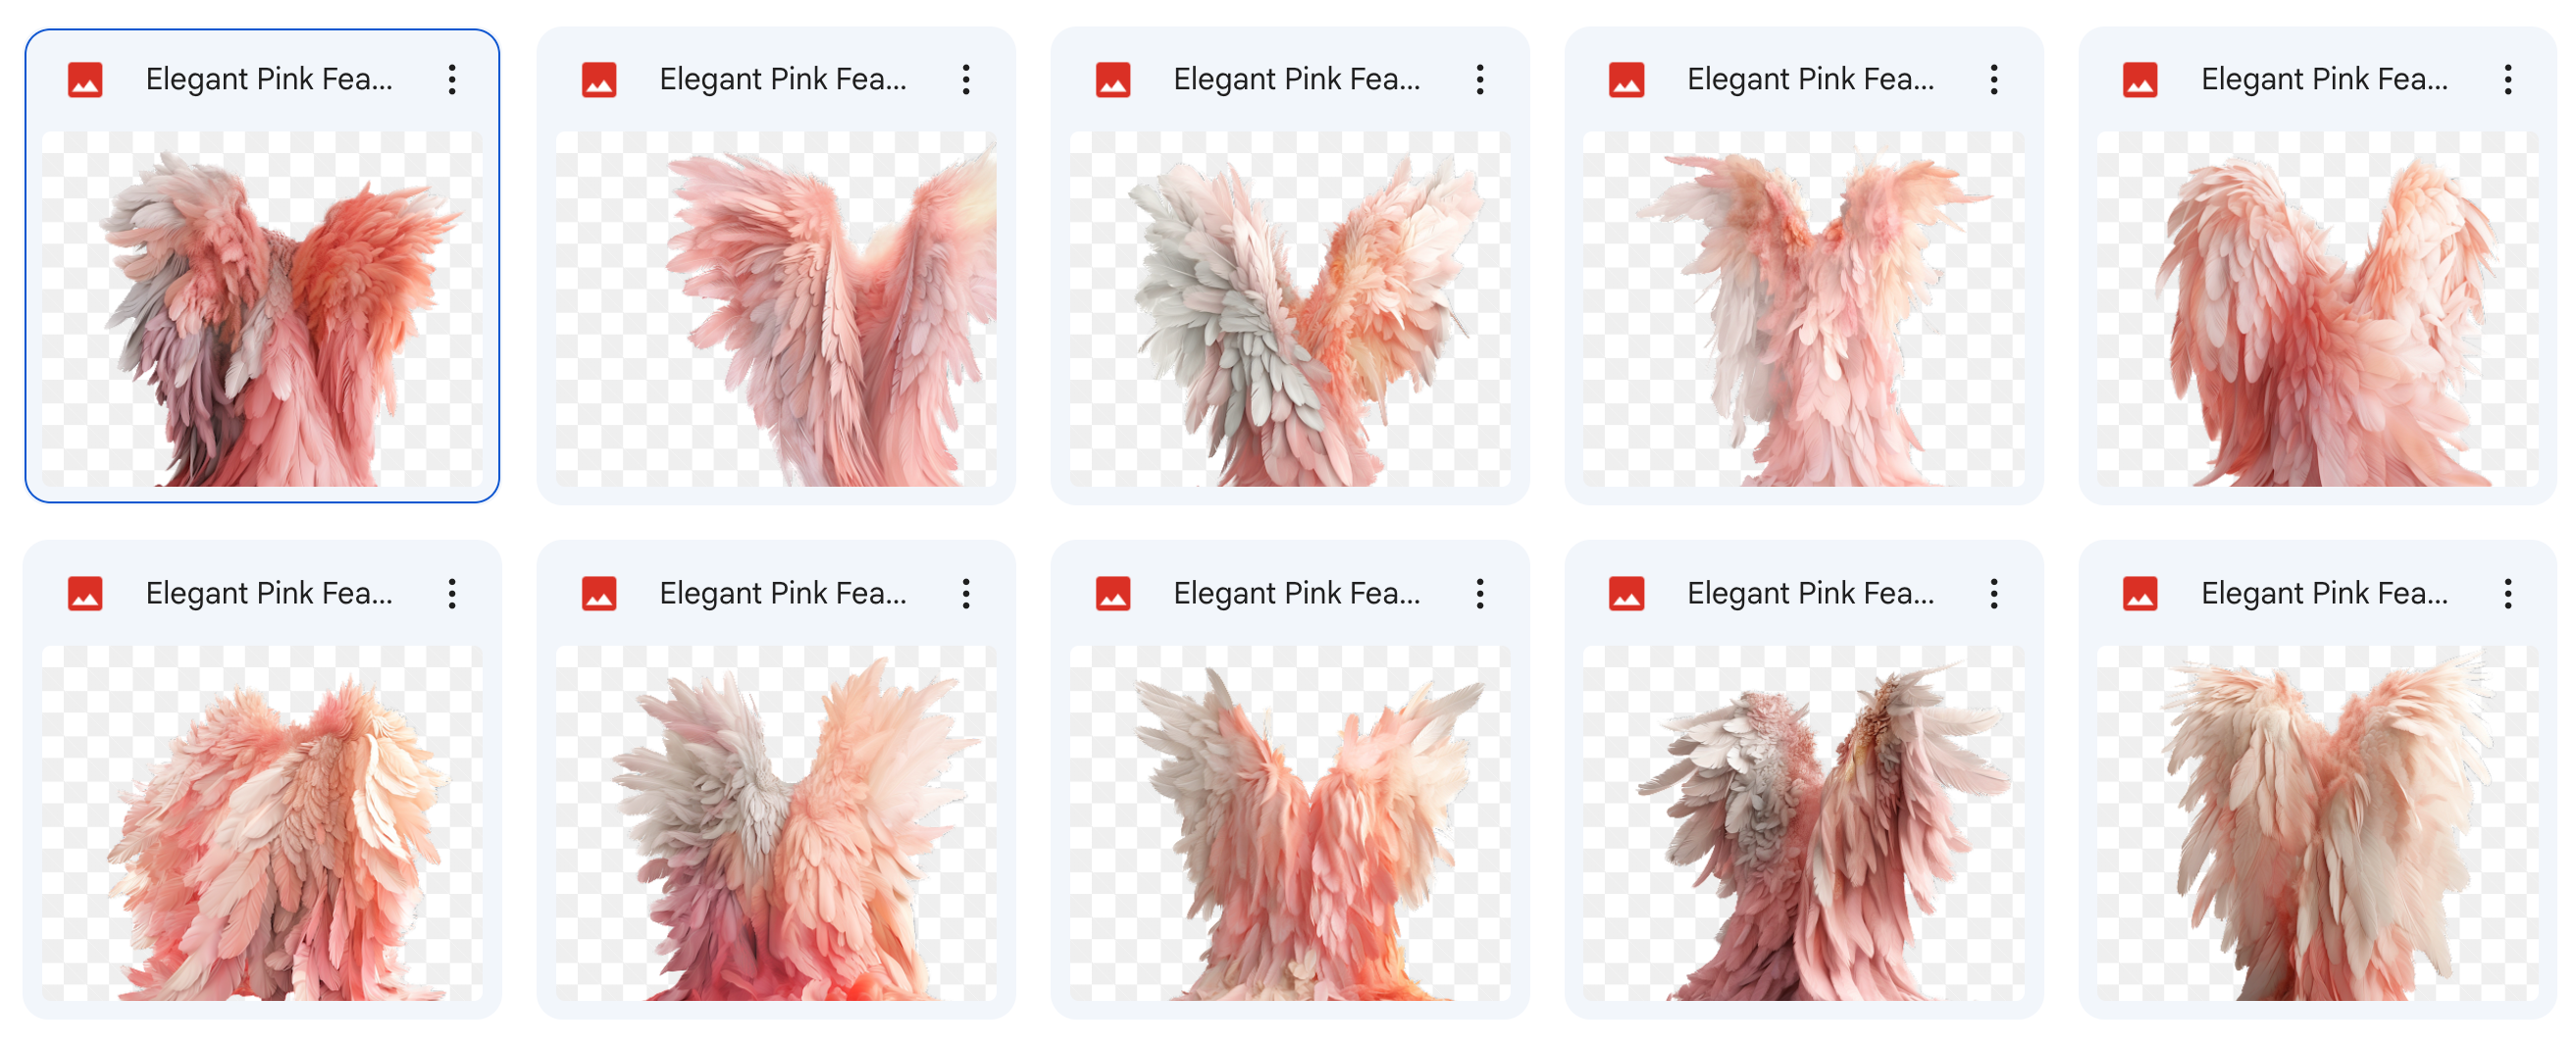 Magical Elegant Pink Feathered Wing Overlays - Meg Bitton Productions